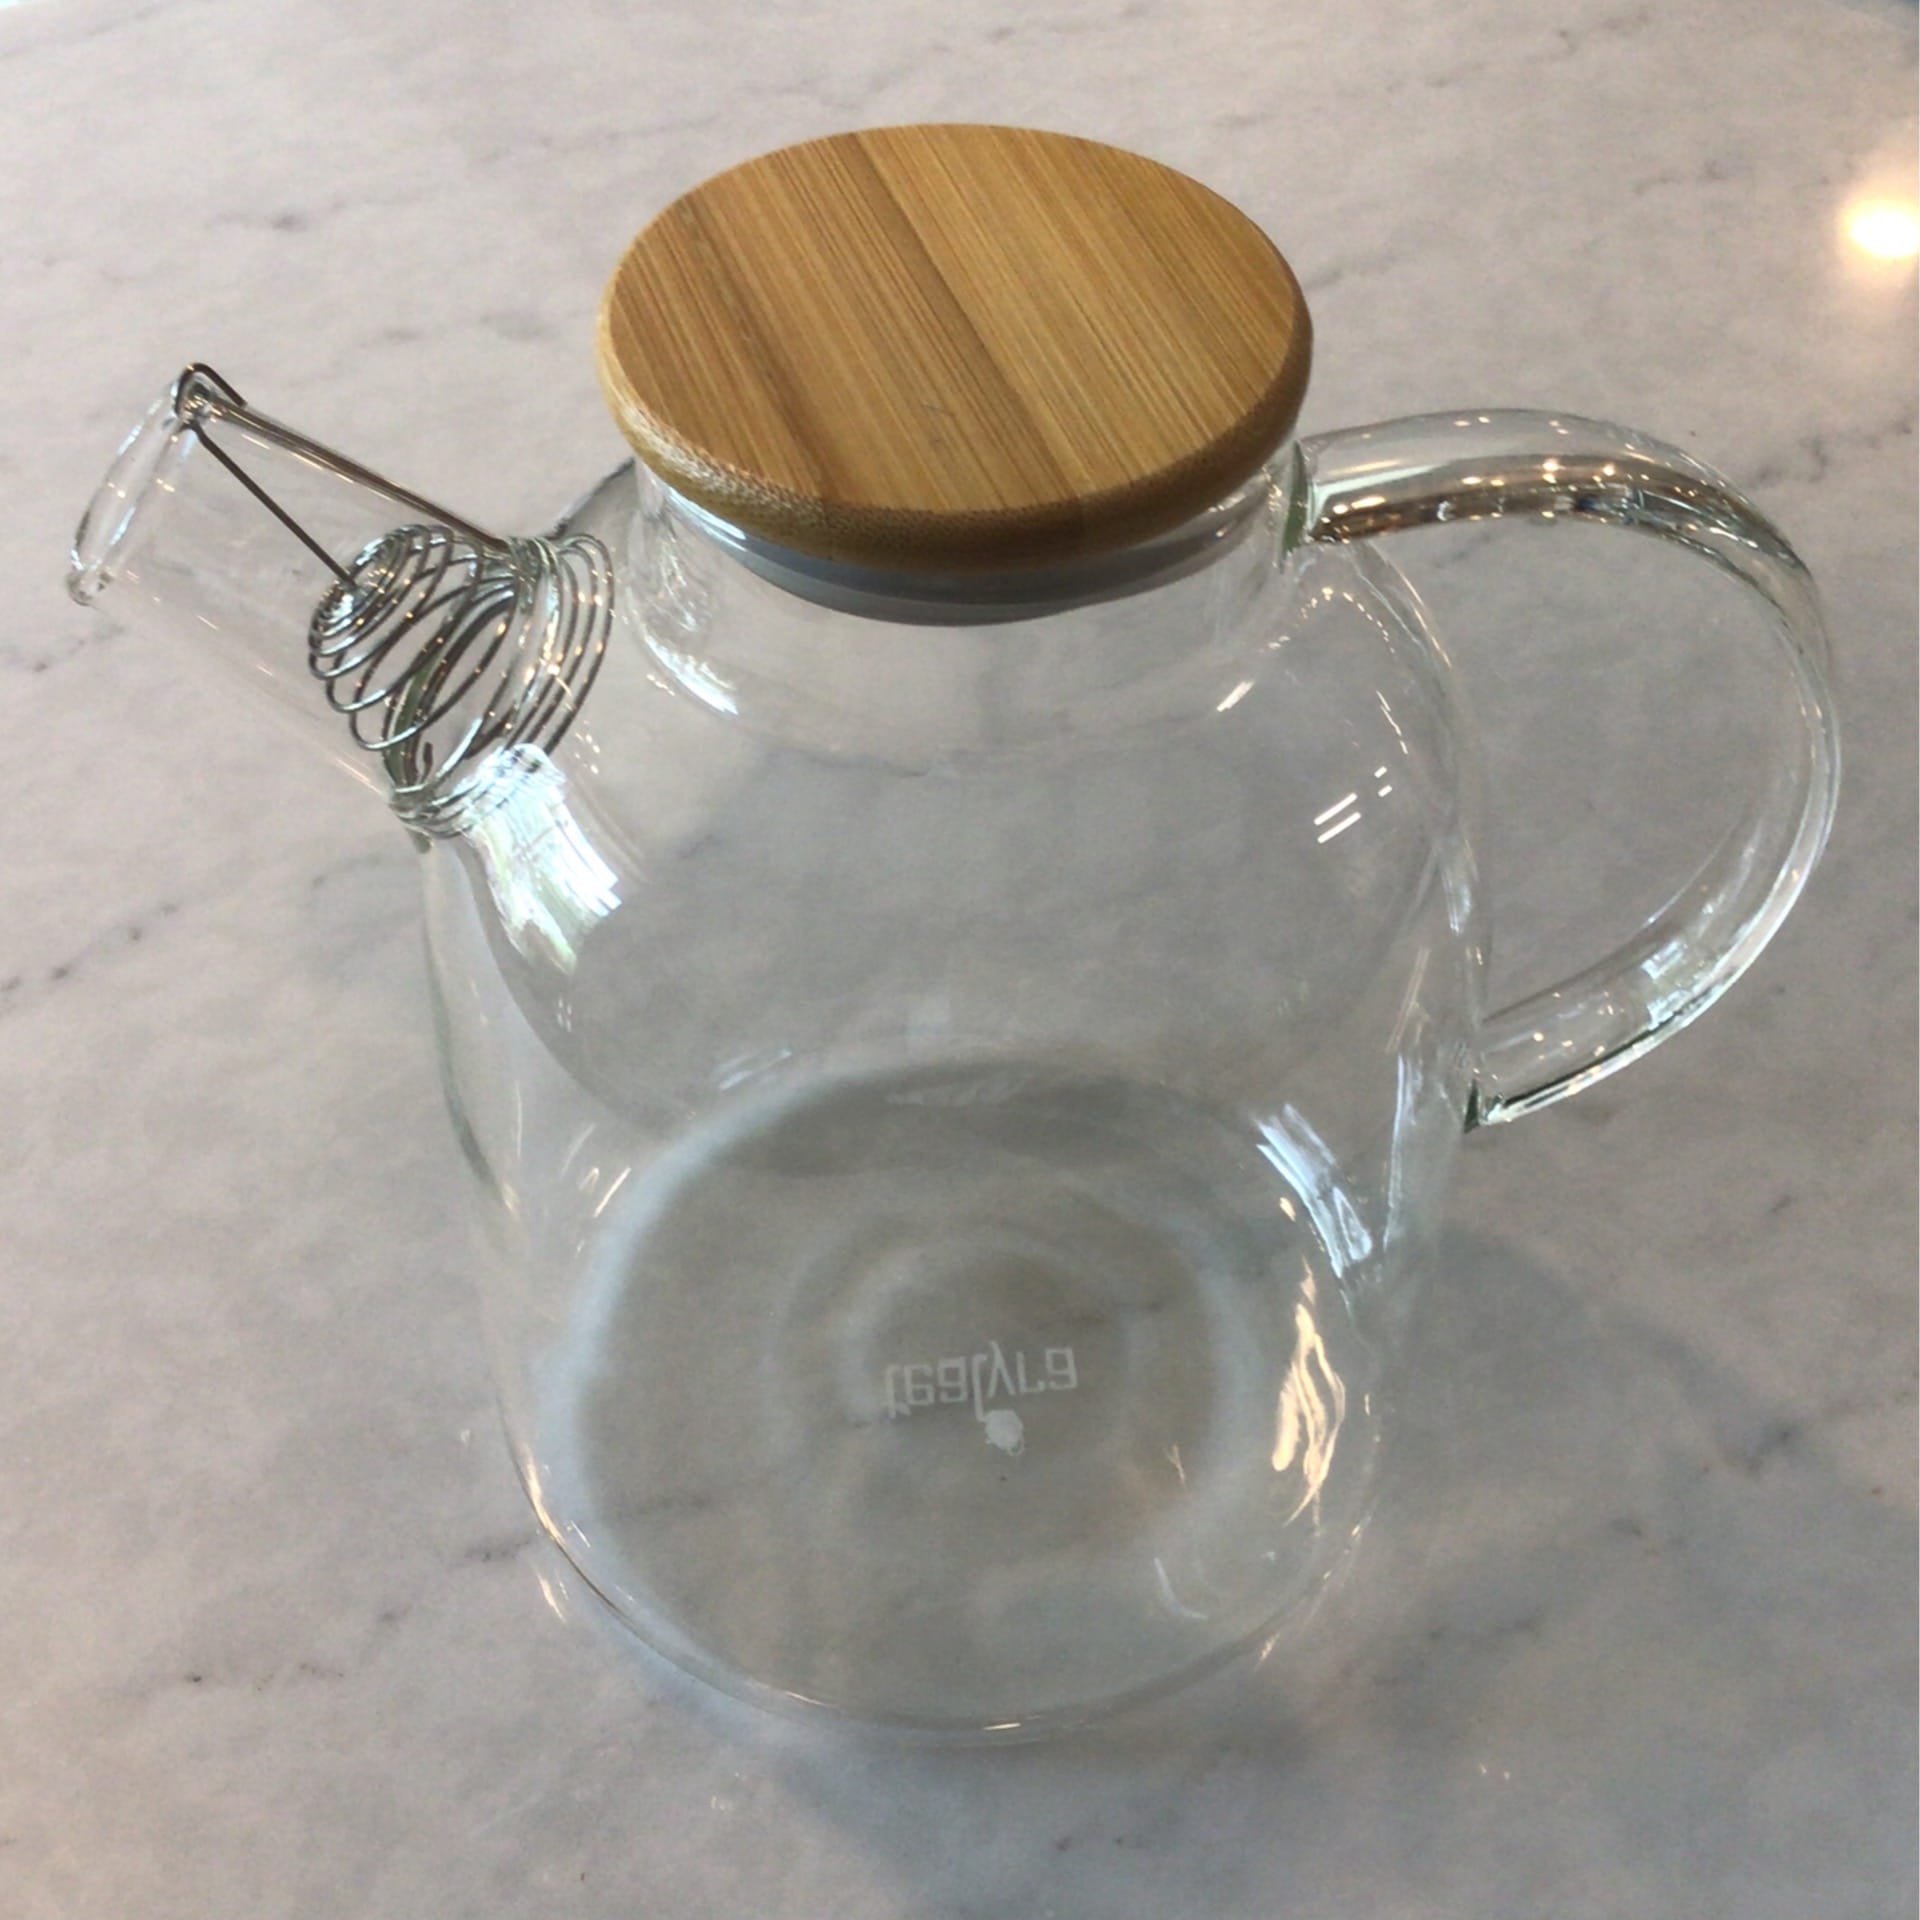 Glass Teapot and Kettle with Wooden Top - 60 oz - exist green